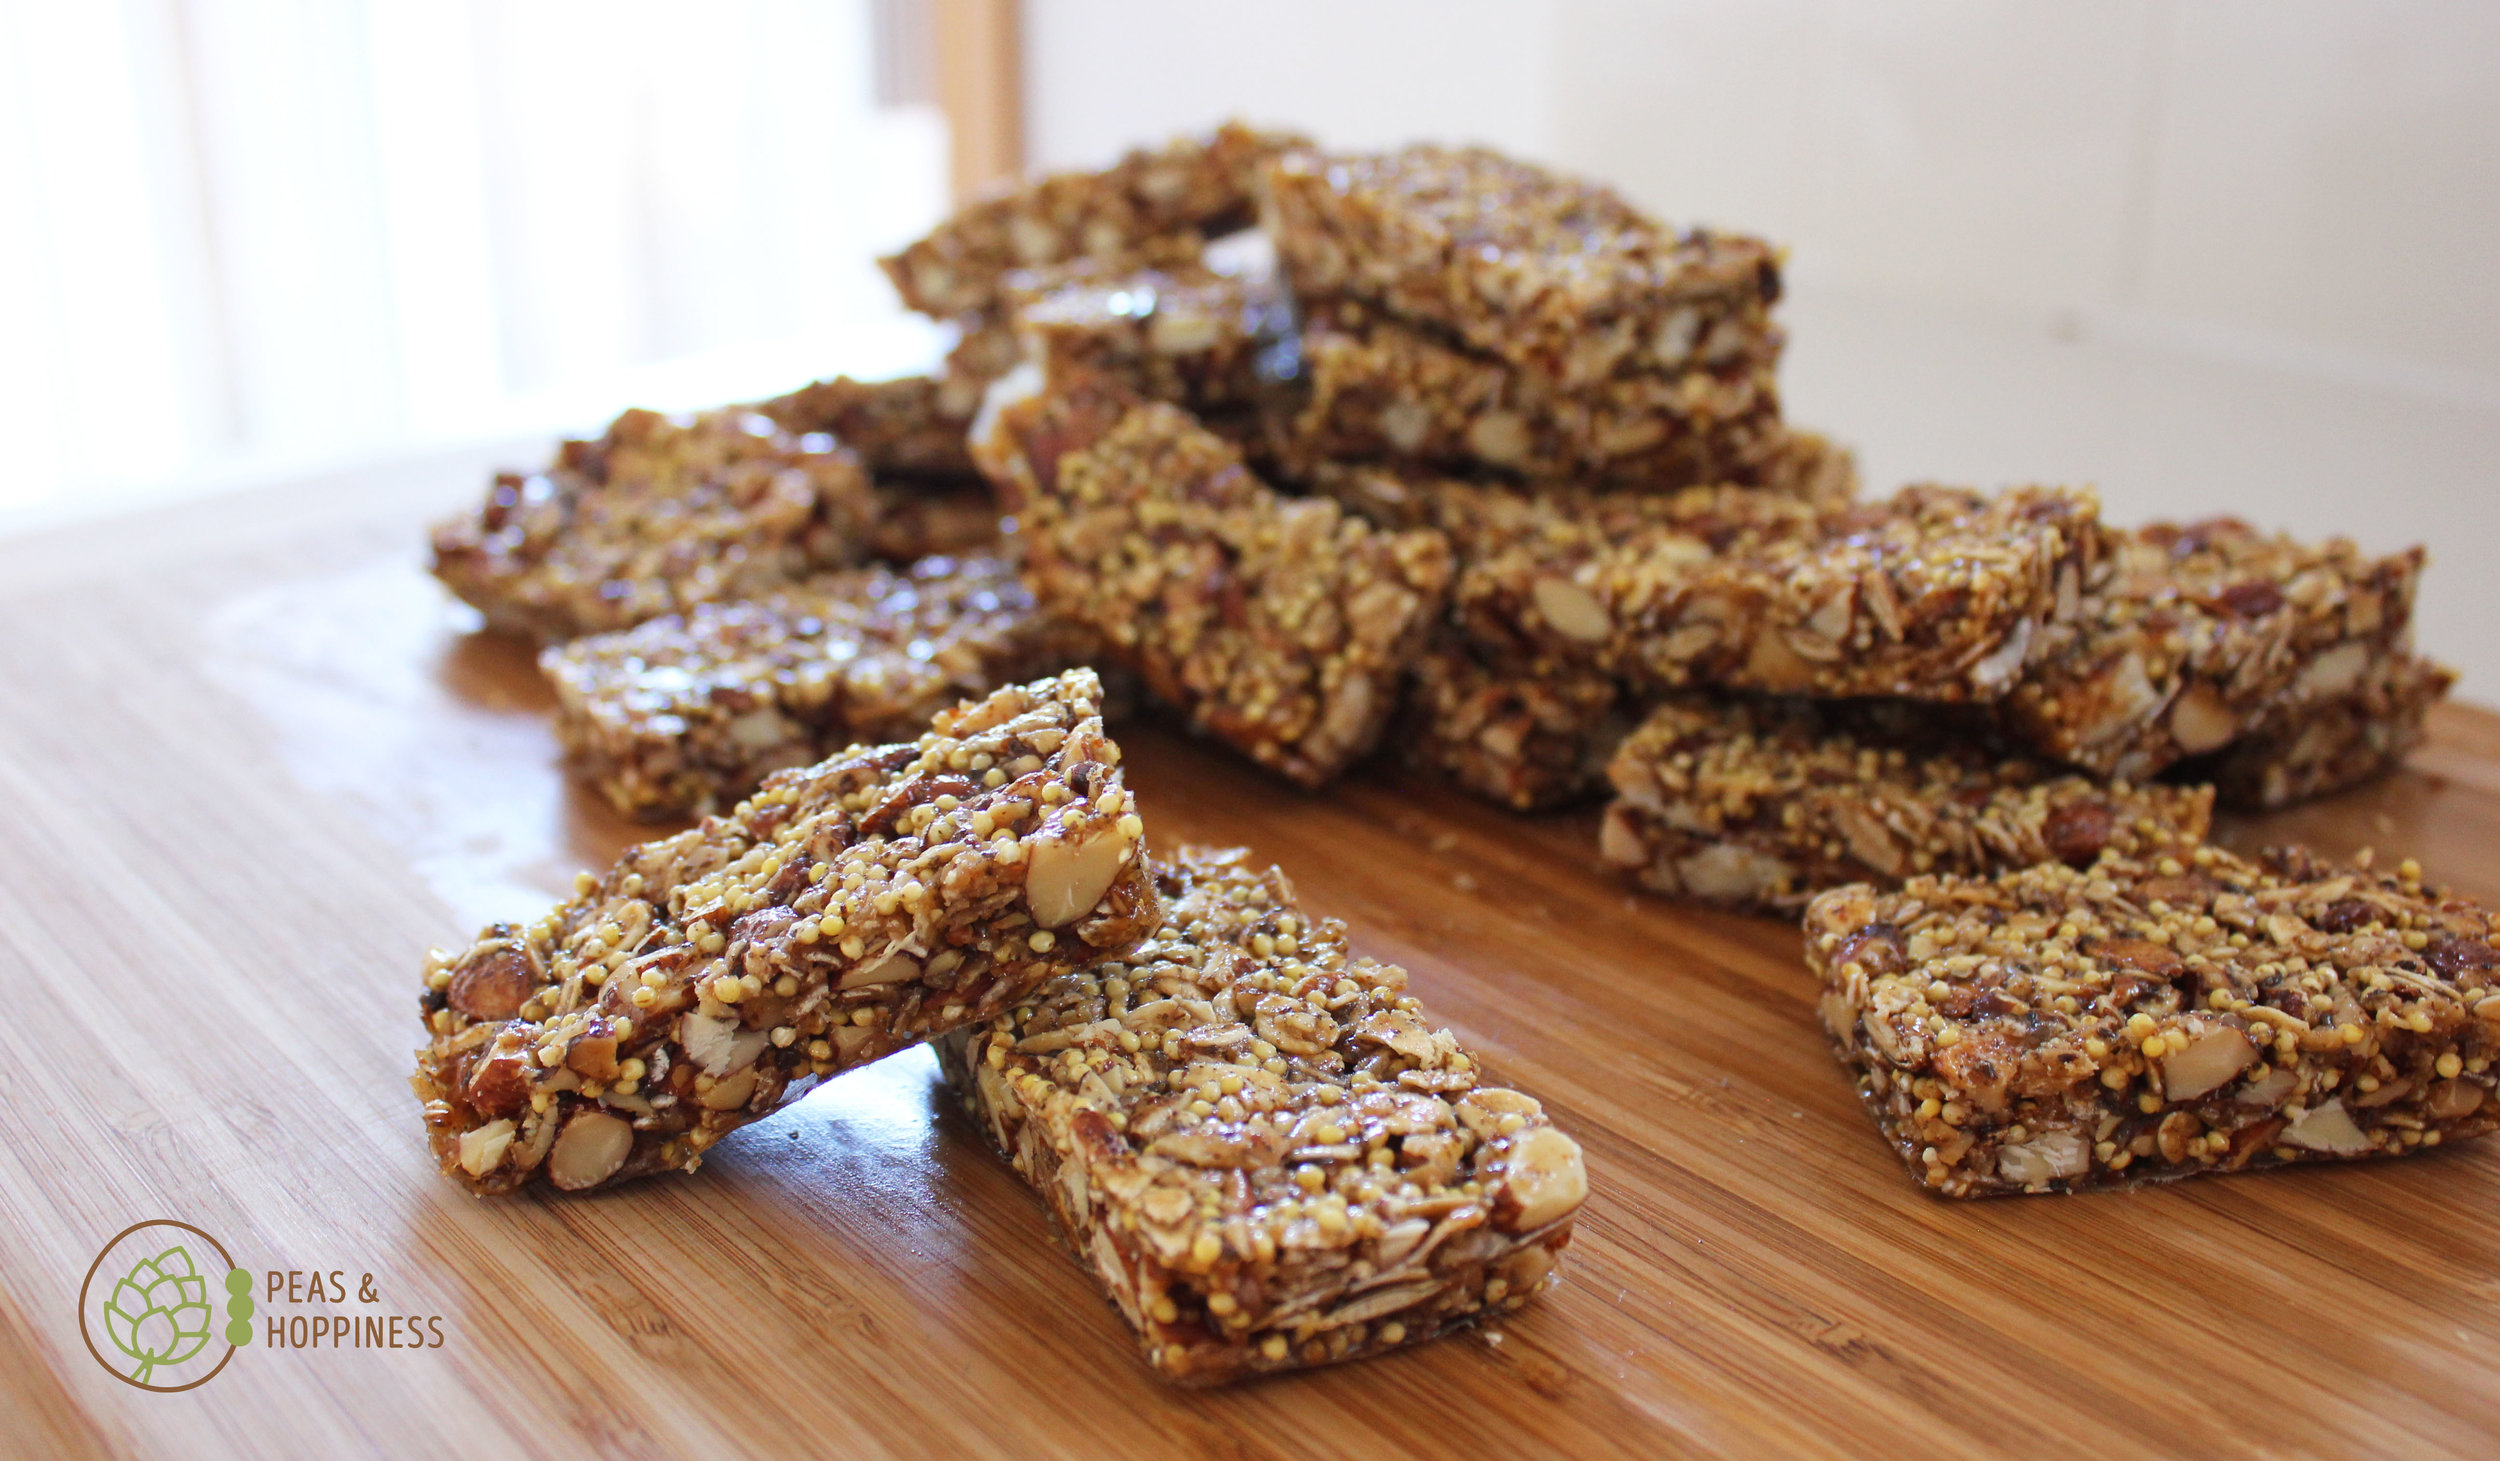 Savory Granola Bars for a quick &amp; healthy breakfast on the go - get the recipe!